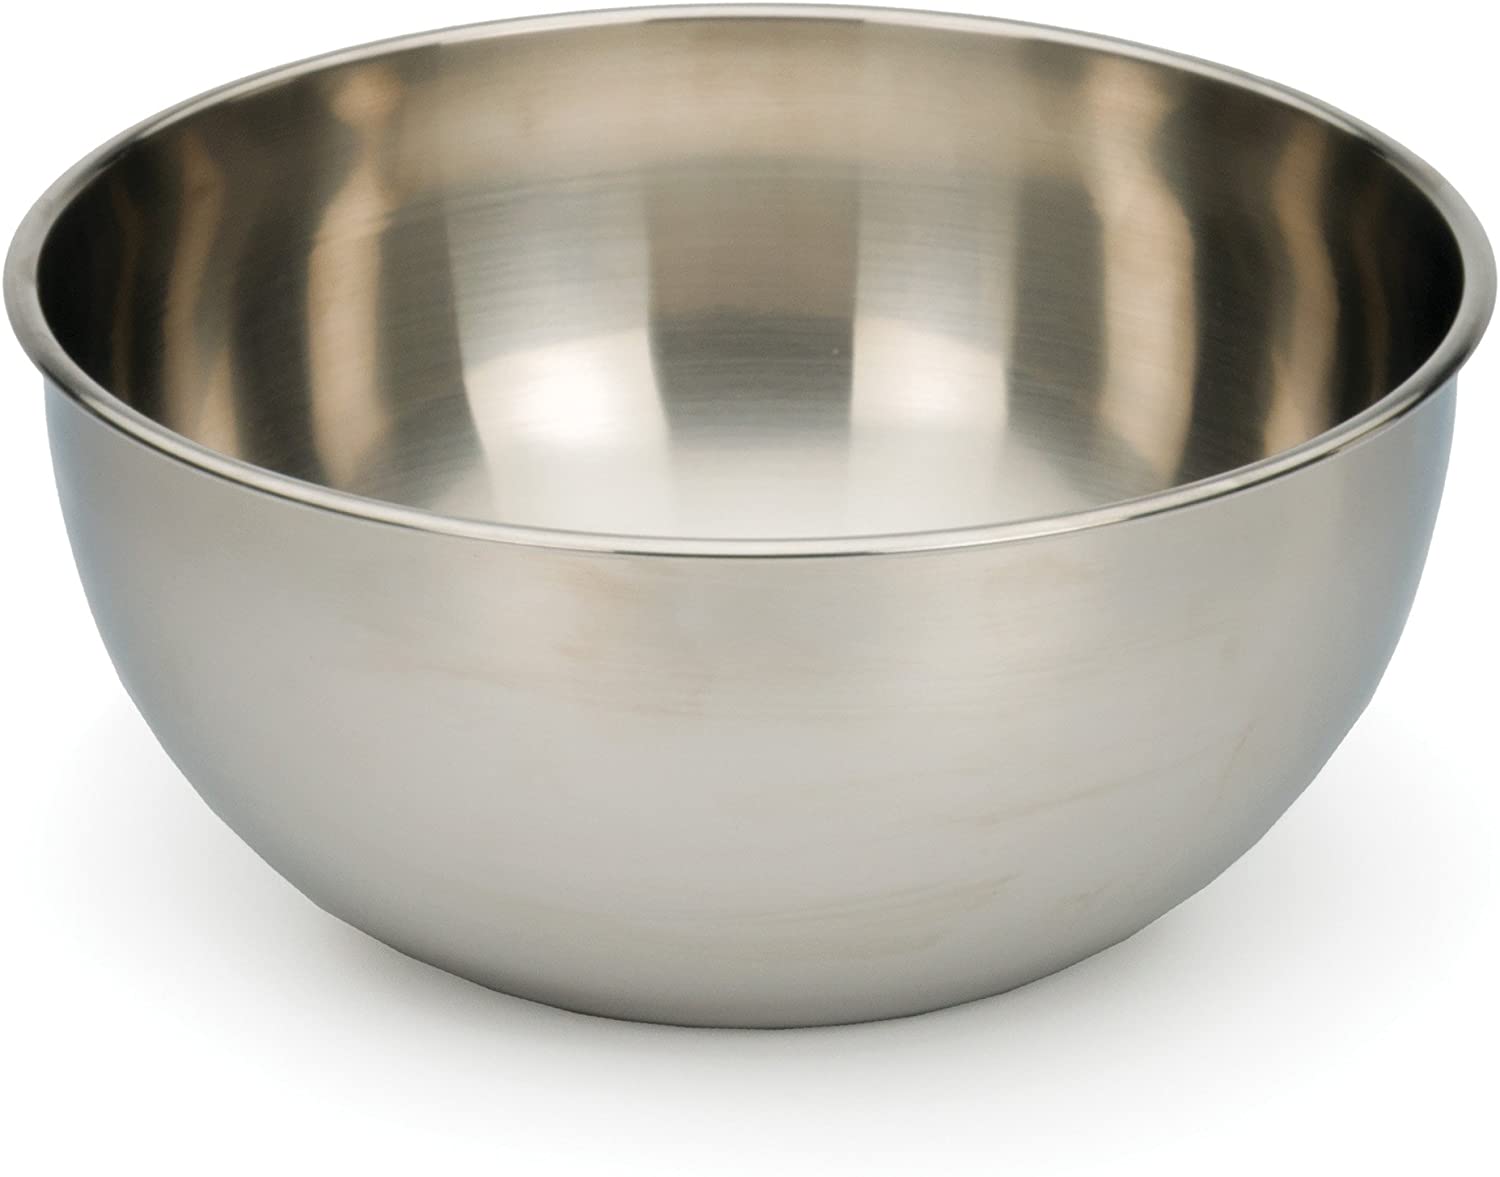 Endurance Stainless Mixing Bowls